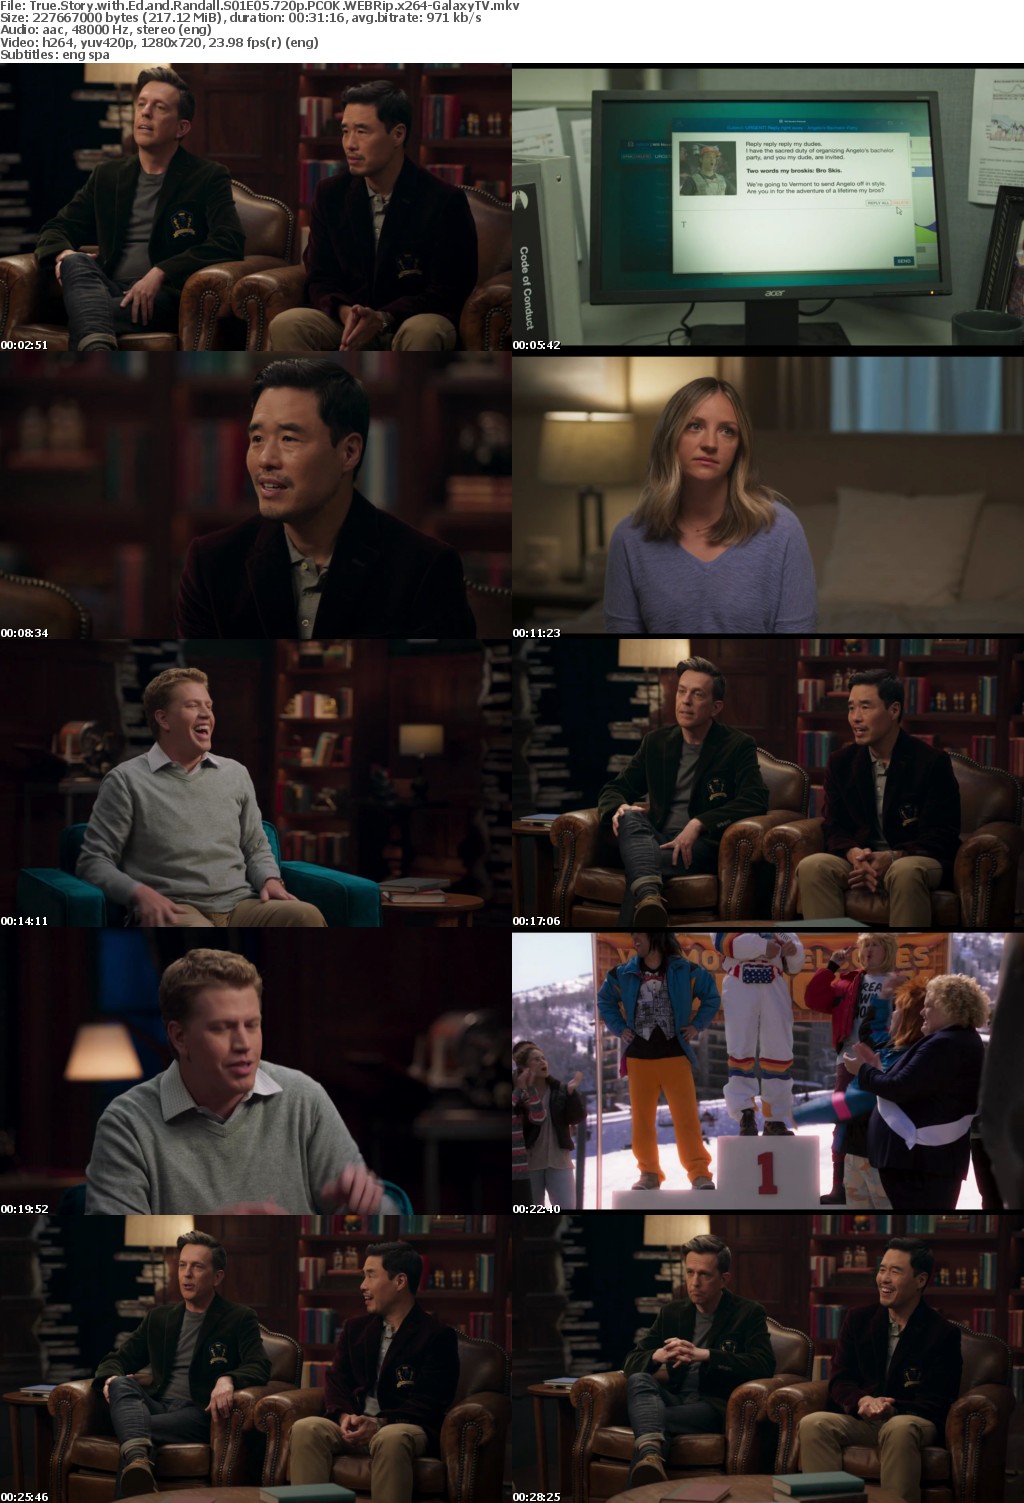 True Story with Ed and Randall S01 COMPLETE 720p PCOK WEBRip x264-GalaxyTV